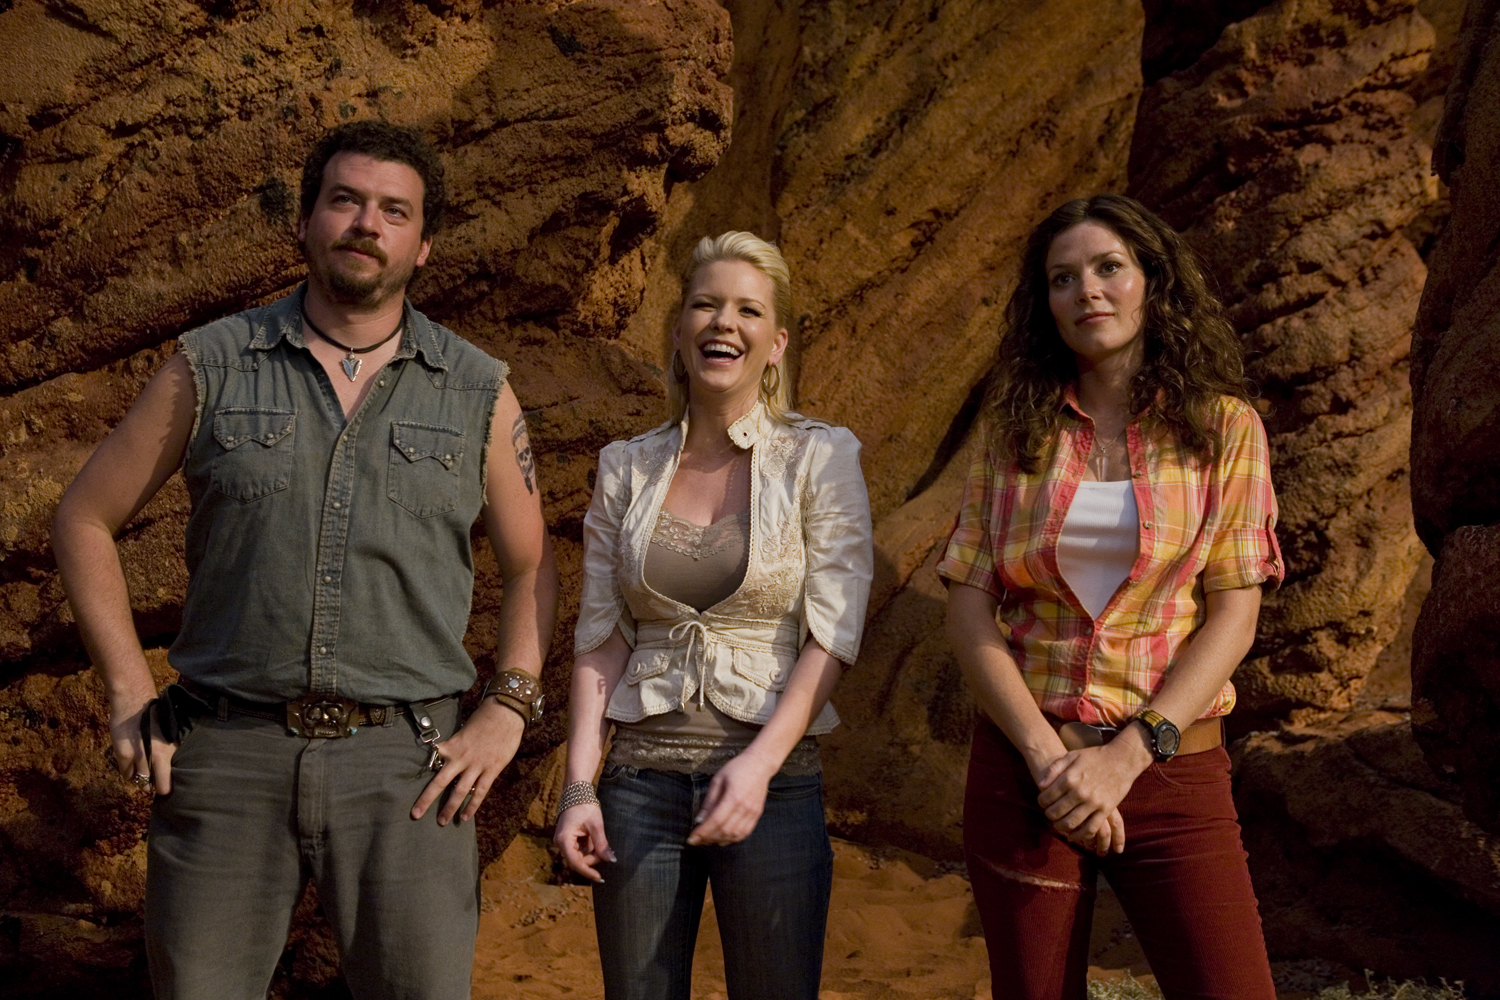 Danny McBride, Anna Friel and Carrie Keagan on the set 